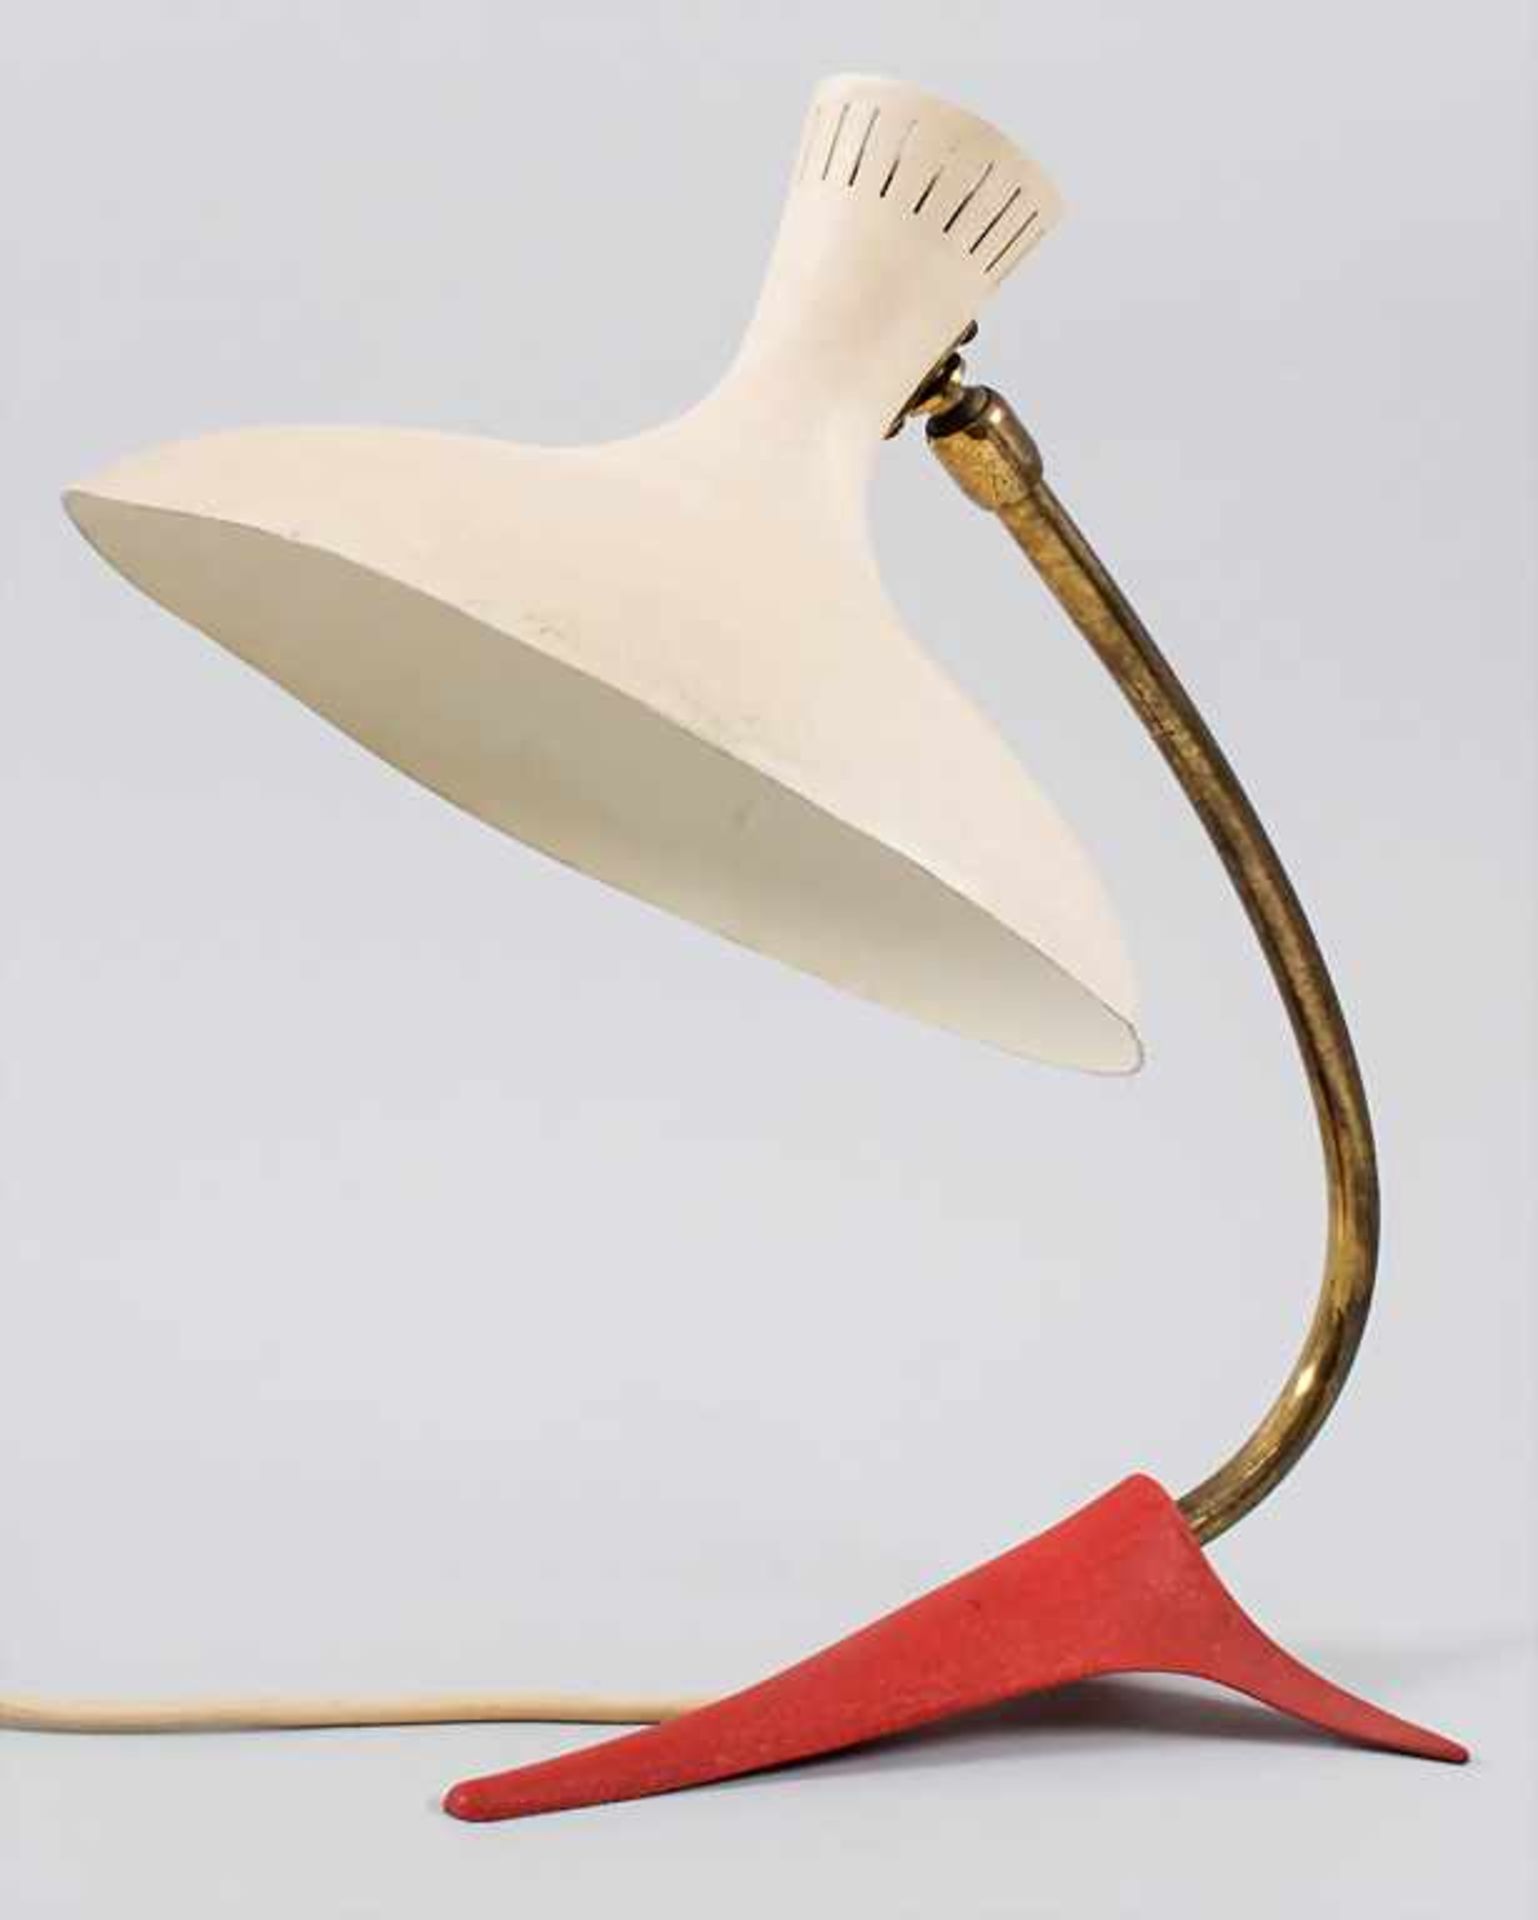 Tischlampe / A table lamp, um 1960